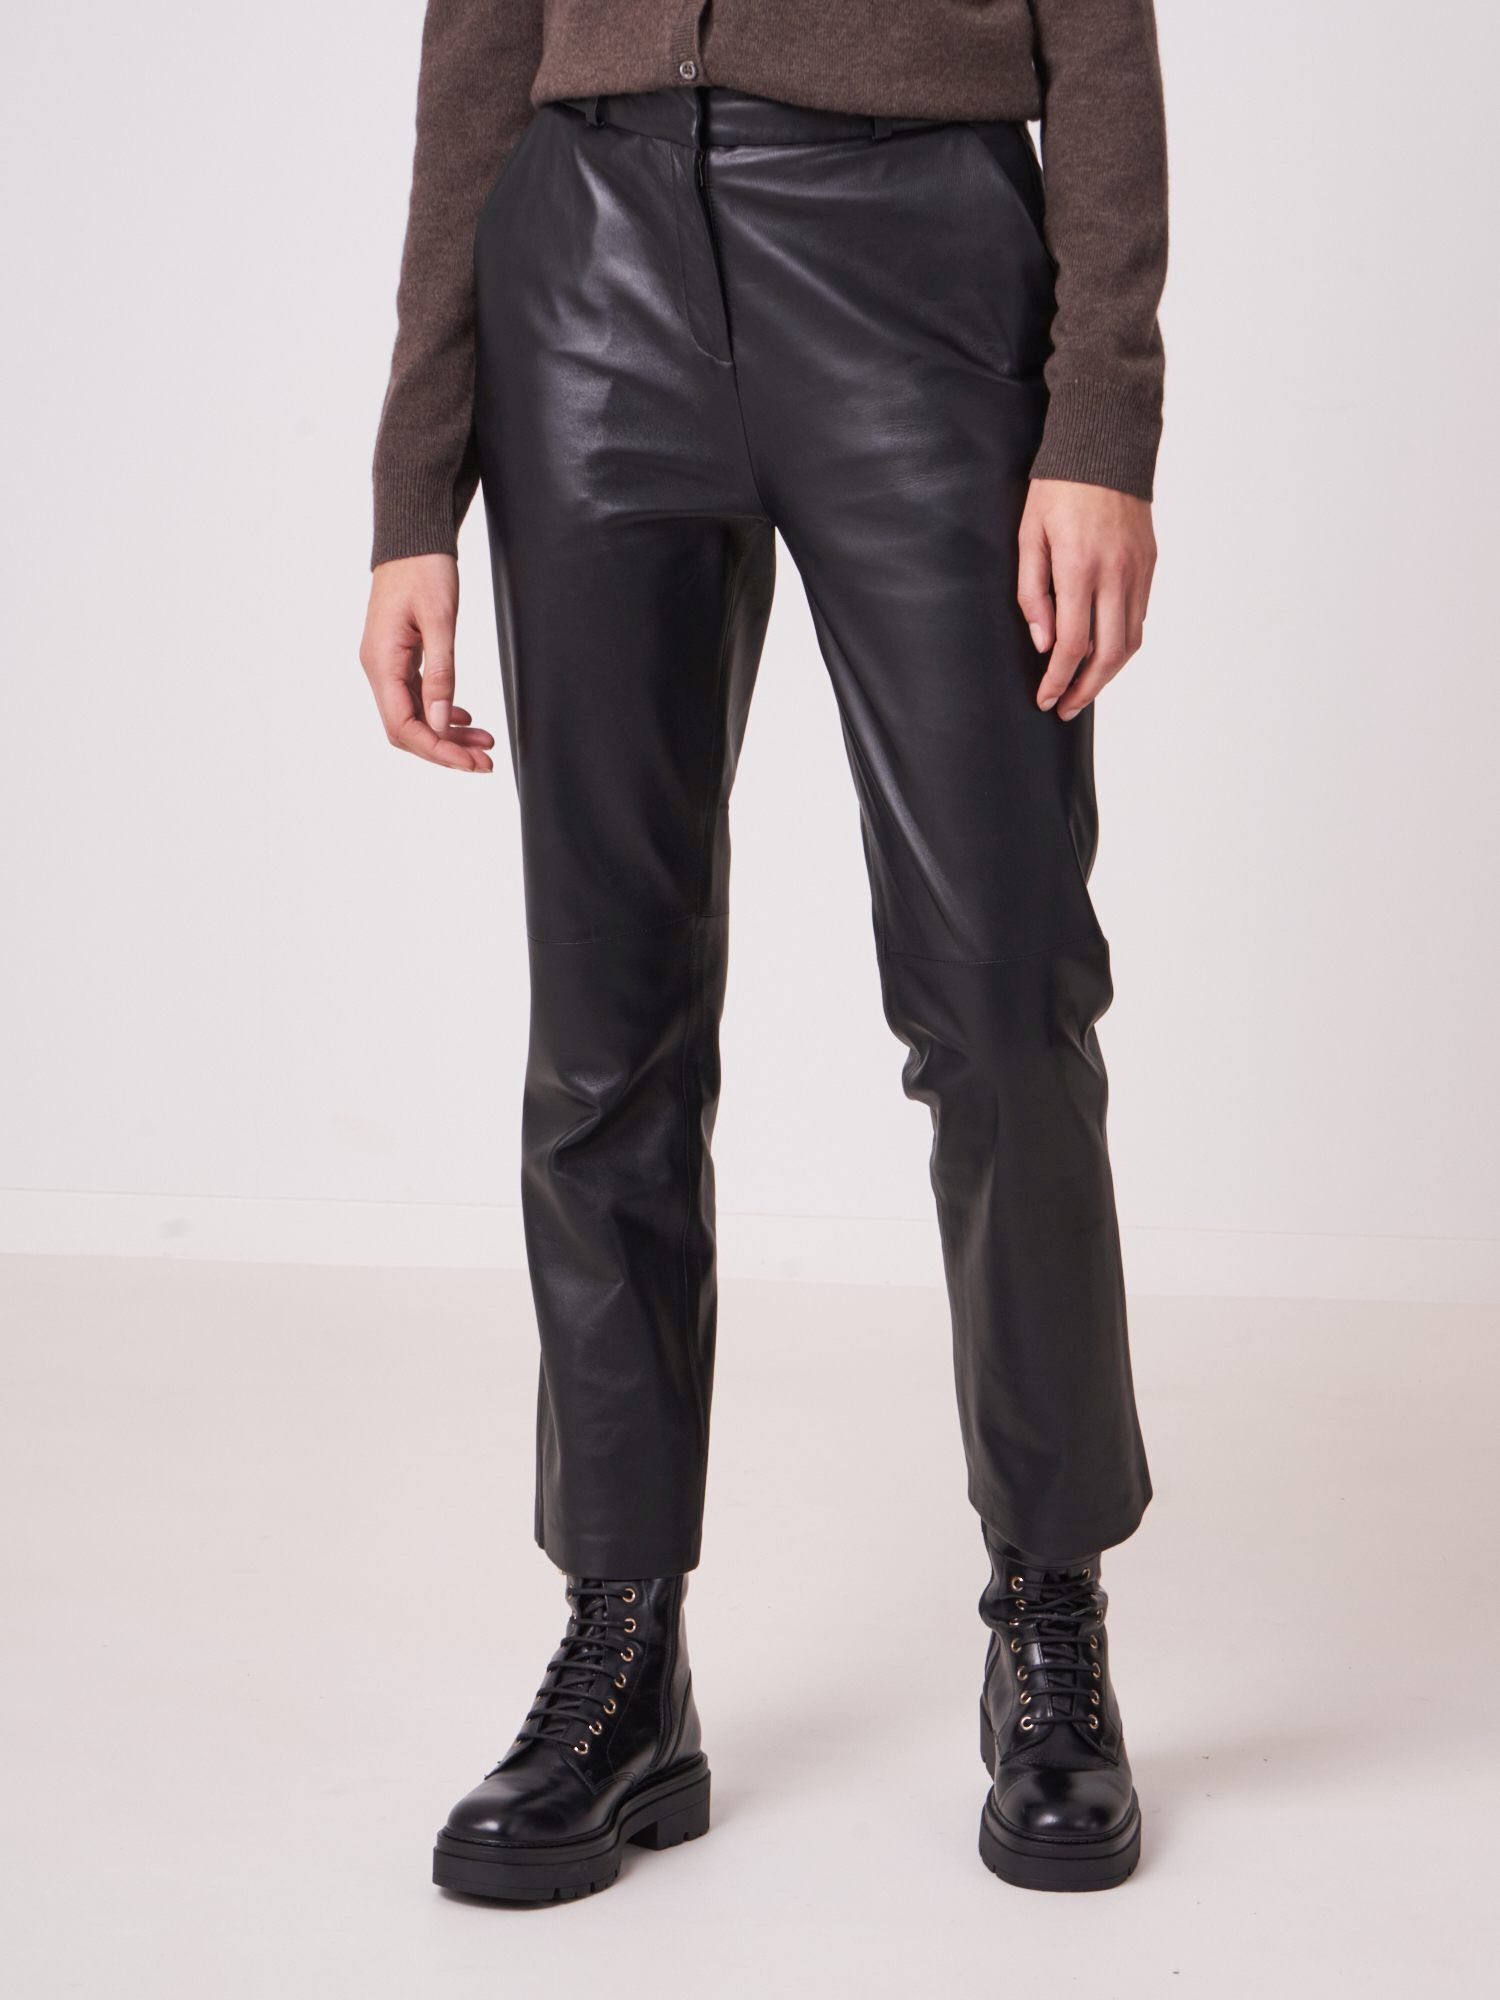 Women's Wide leather pants | REPEAT cashmere